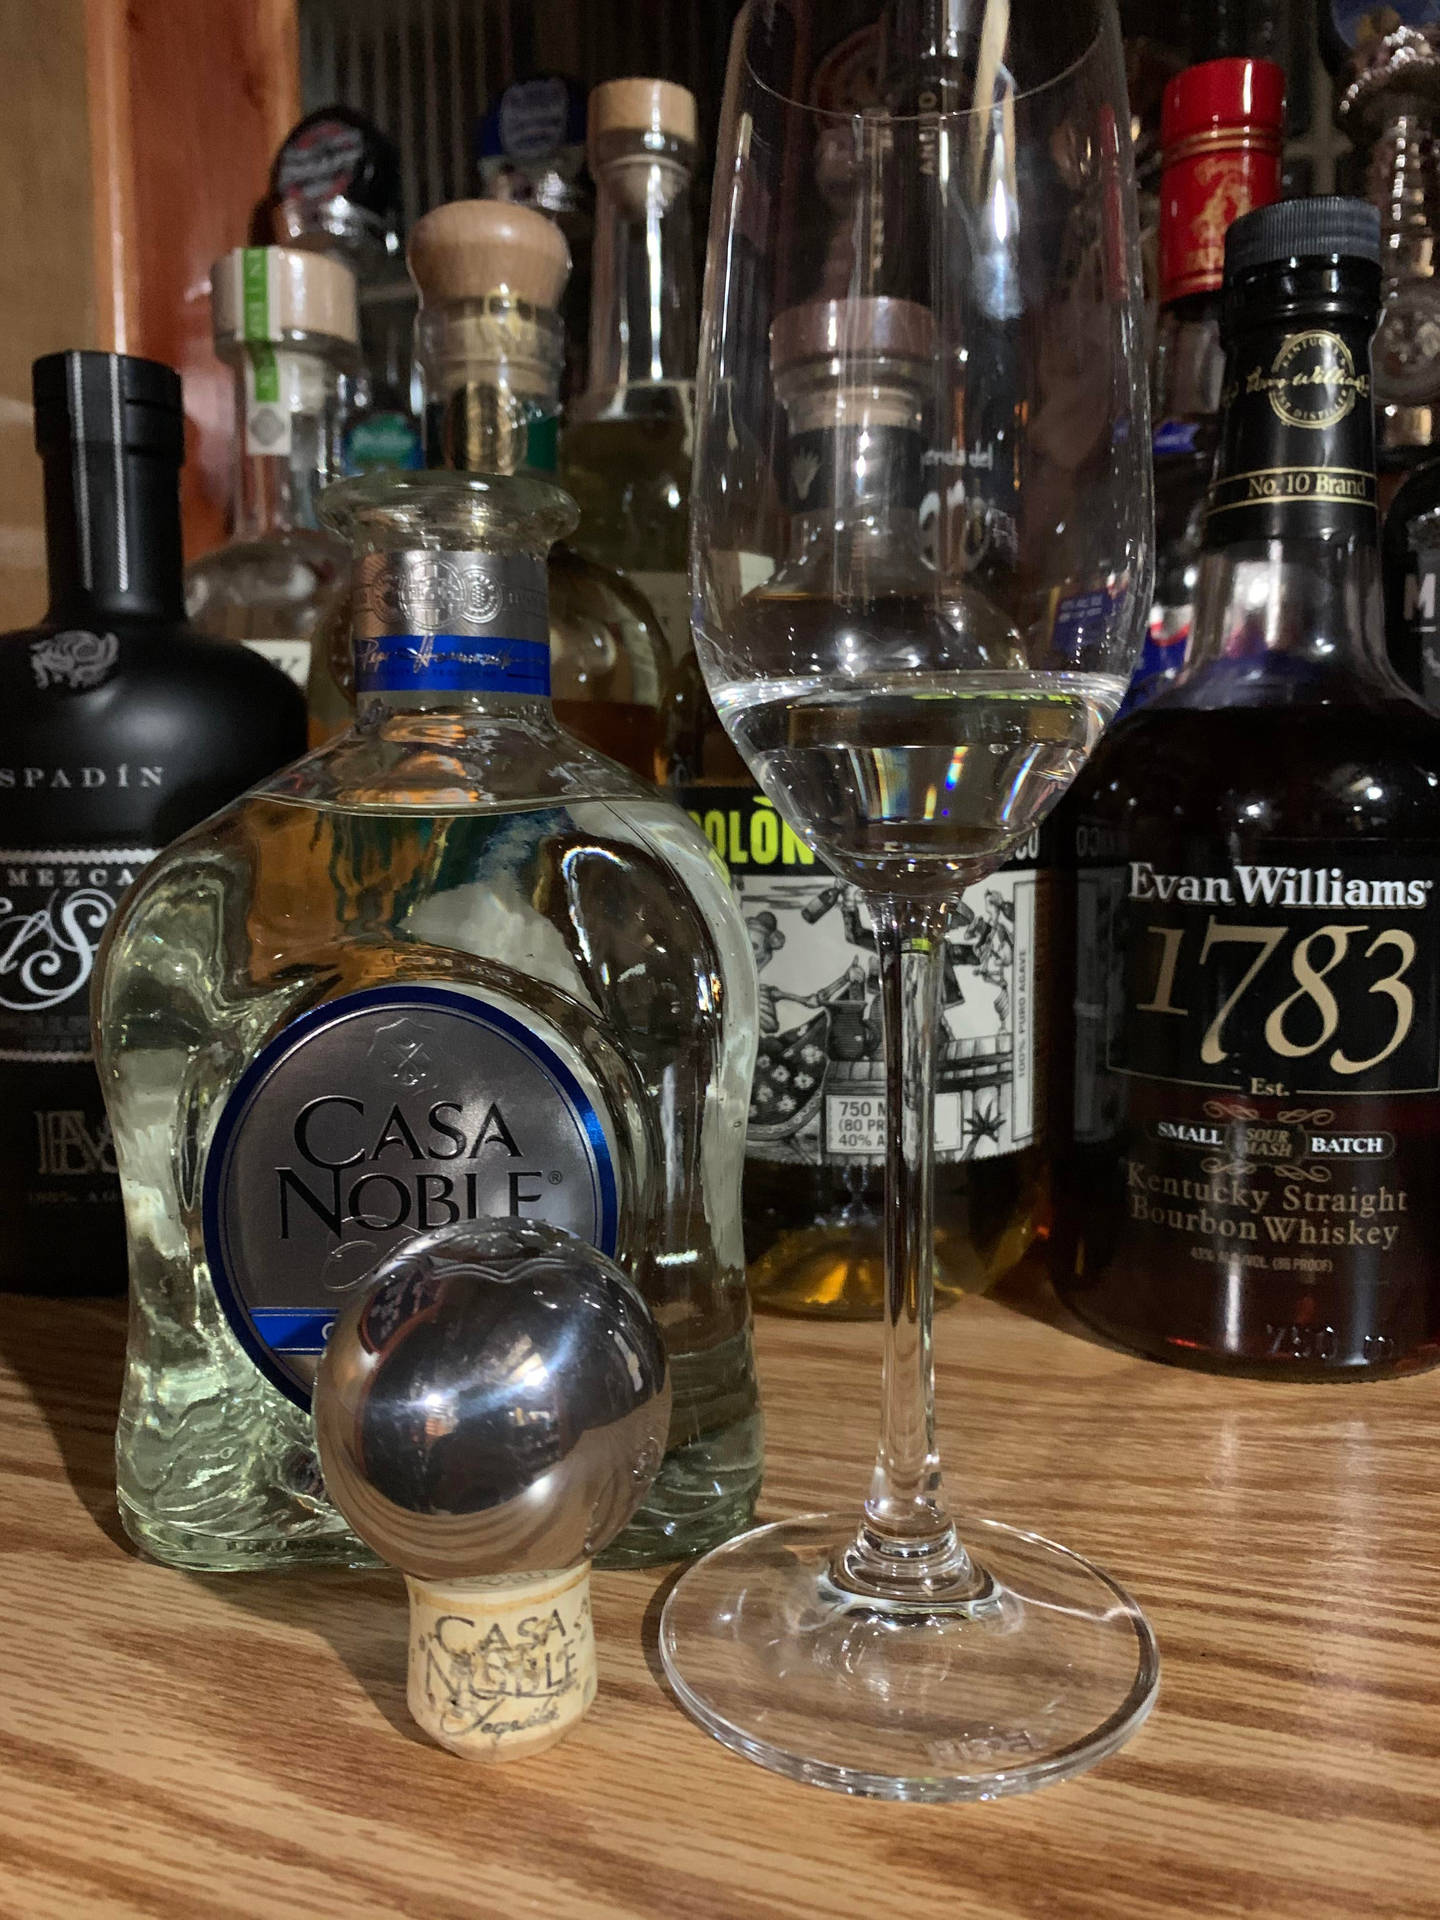 Caption: Casa Noble Crystal Blanco Tequila in an Elegant Champagne Glass Wallpaper